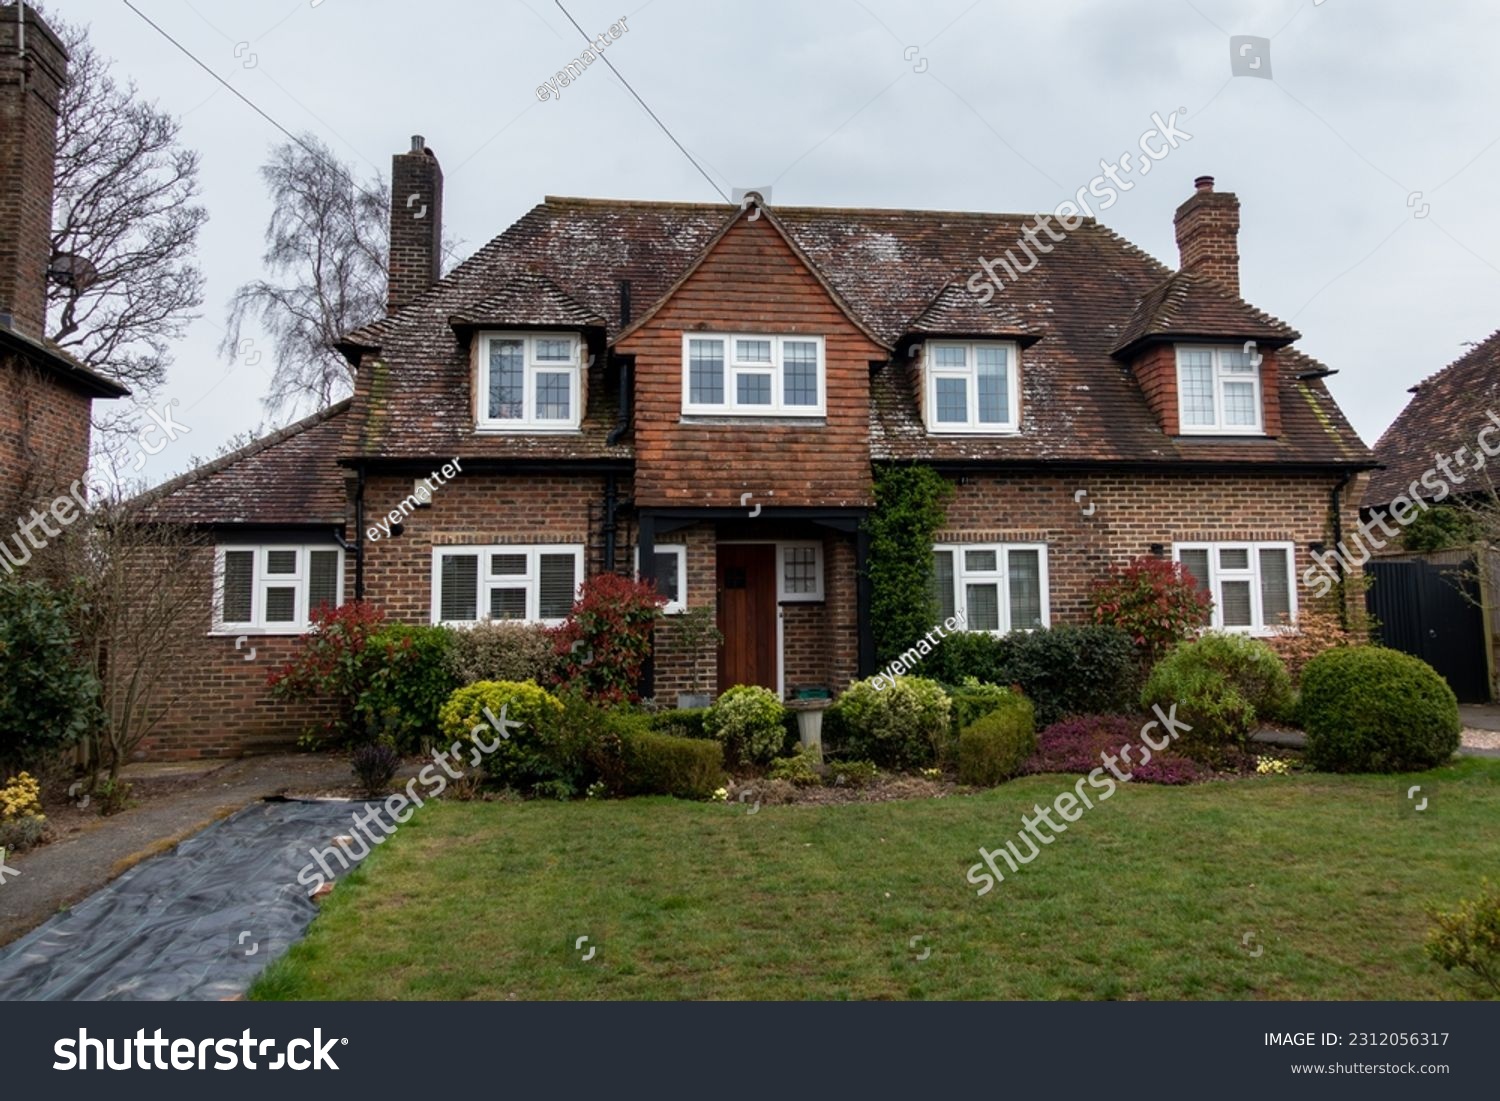 Quaint English brick built detached cottage style residence, with dormers and front facing gables #2312056317